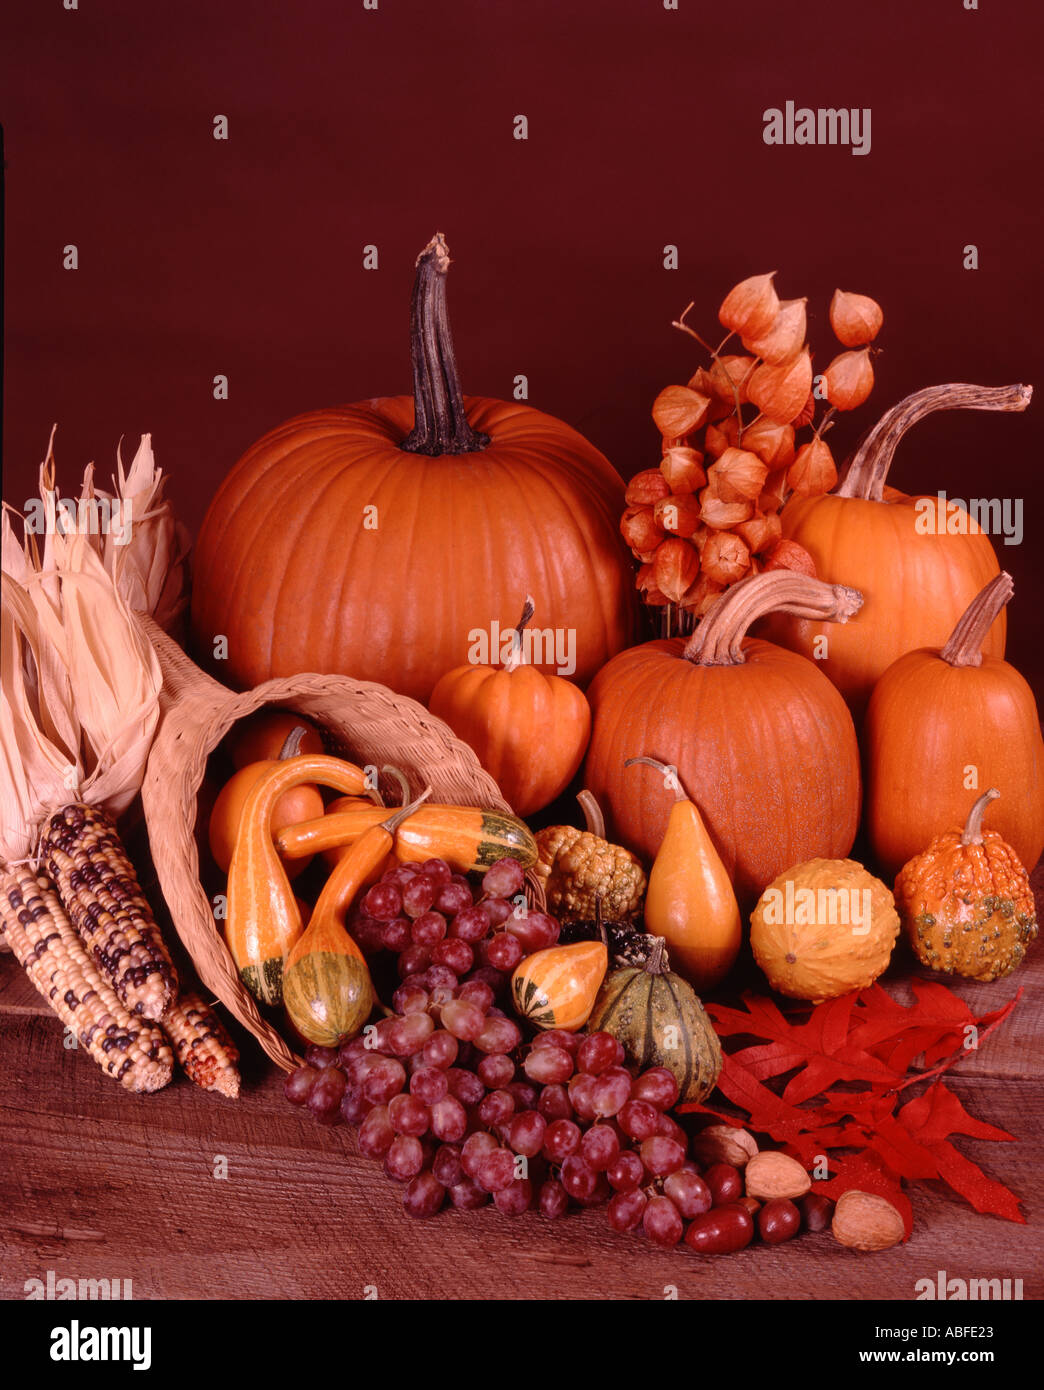 Harvest still life with cornucopia and autumn vegetables against a ...